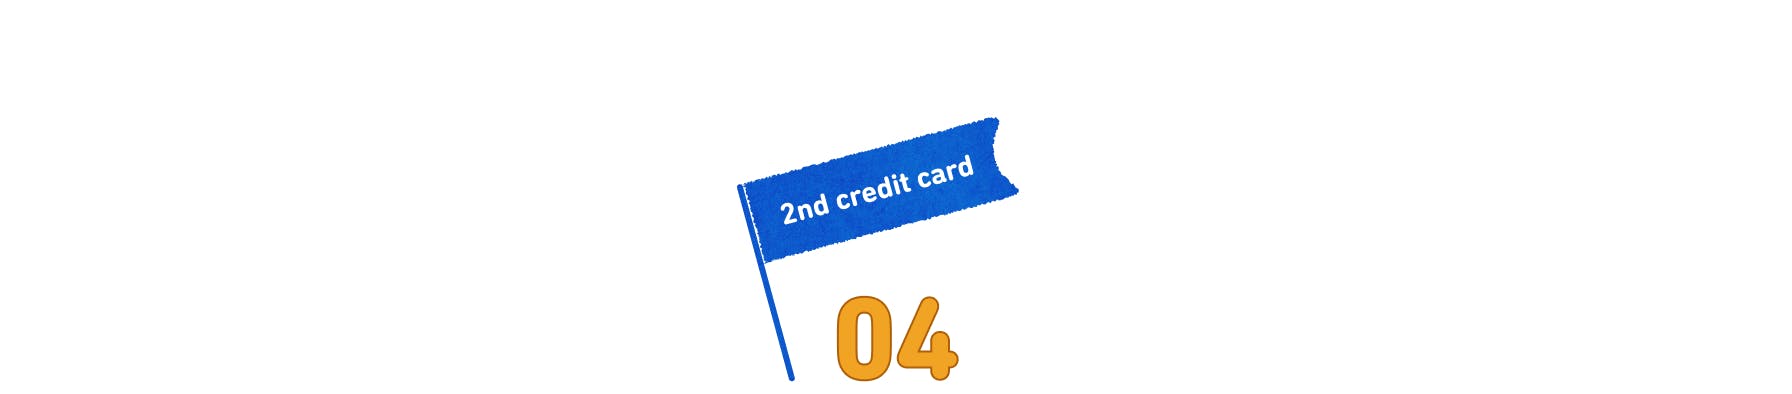 2nd credit card 04